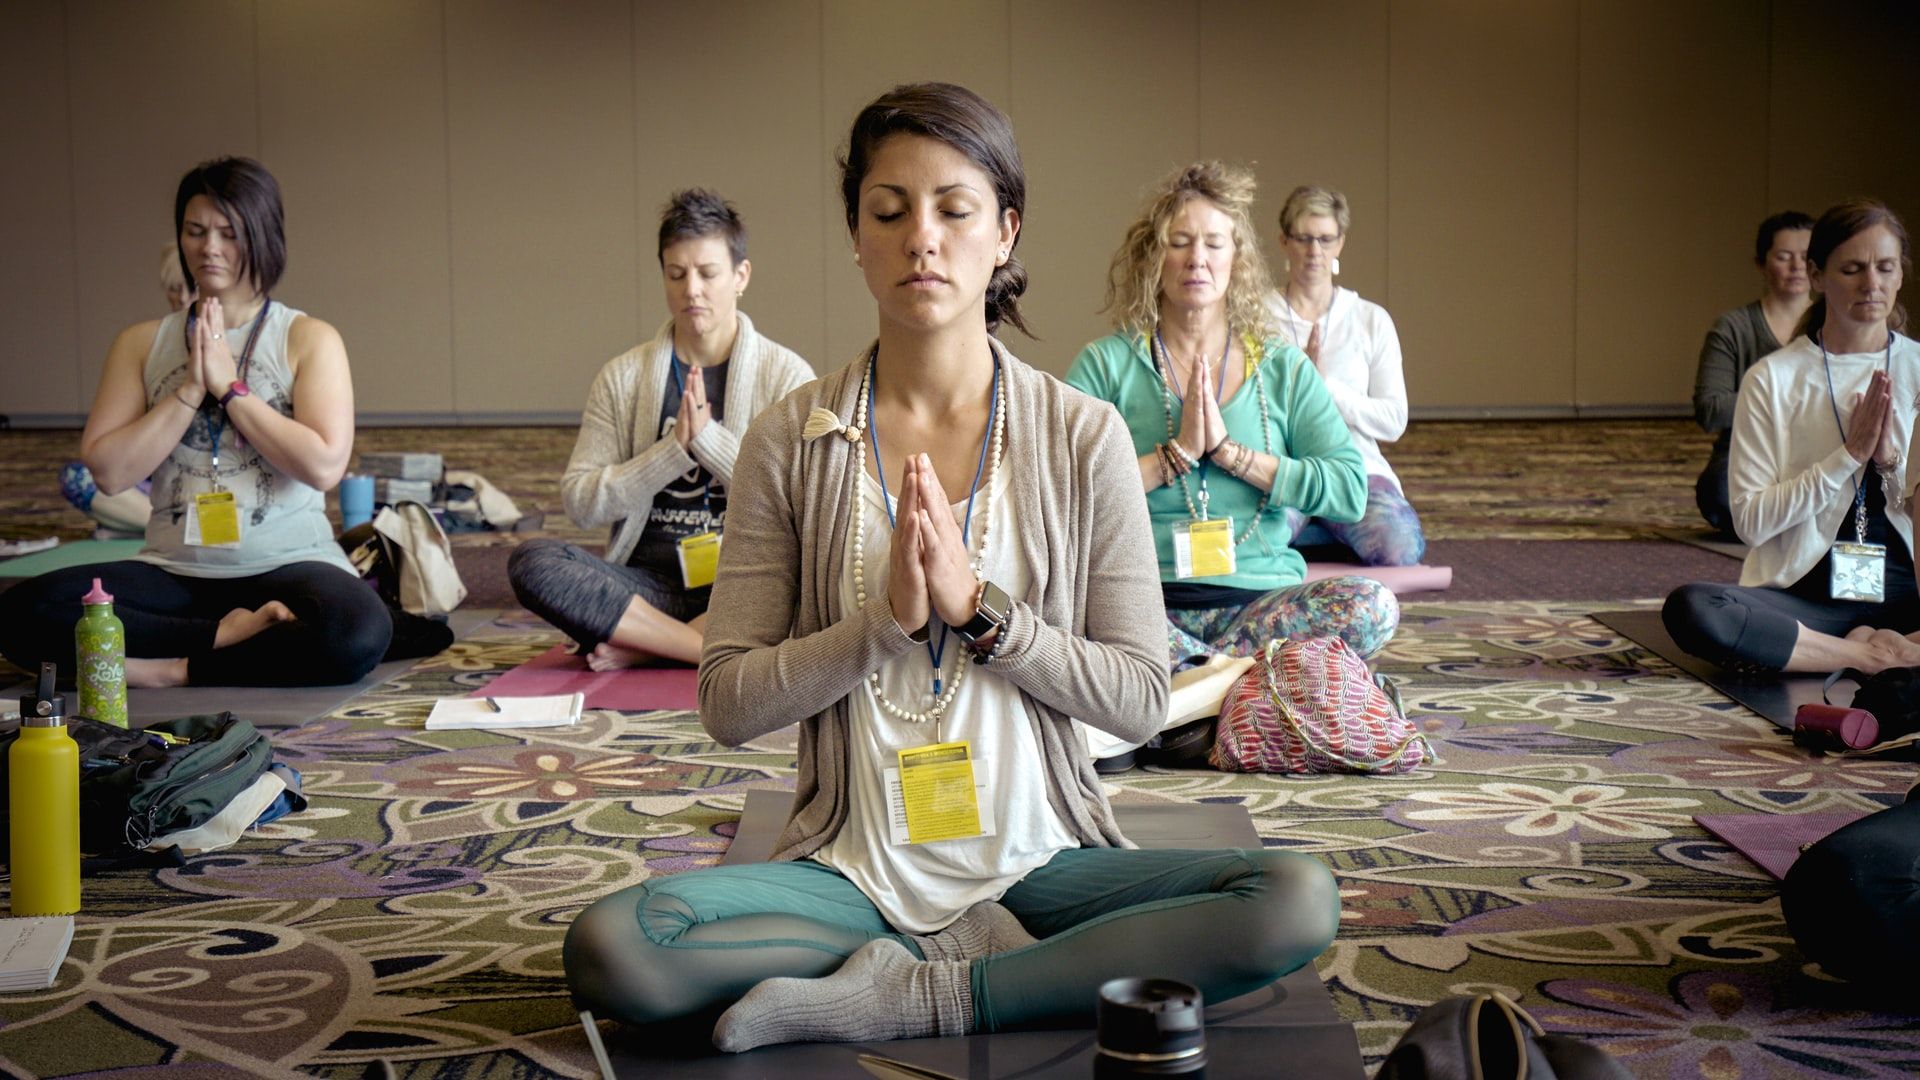 How to Convince Your Company to Bring Yoga Into the Office